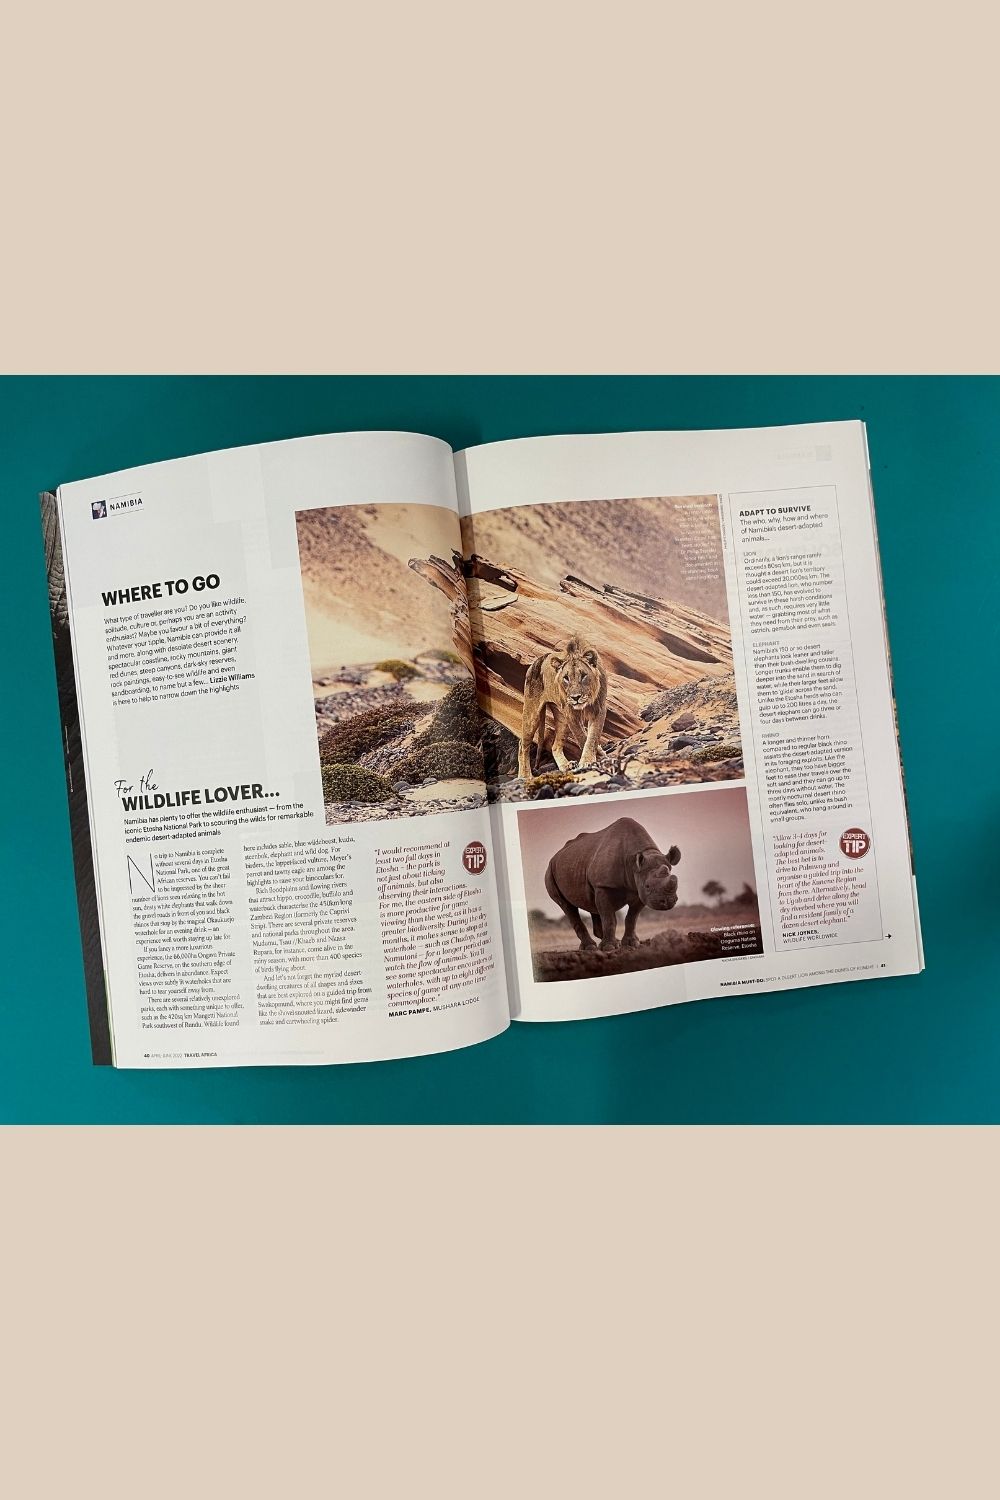 Travel Africa Issue 96